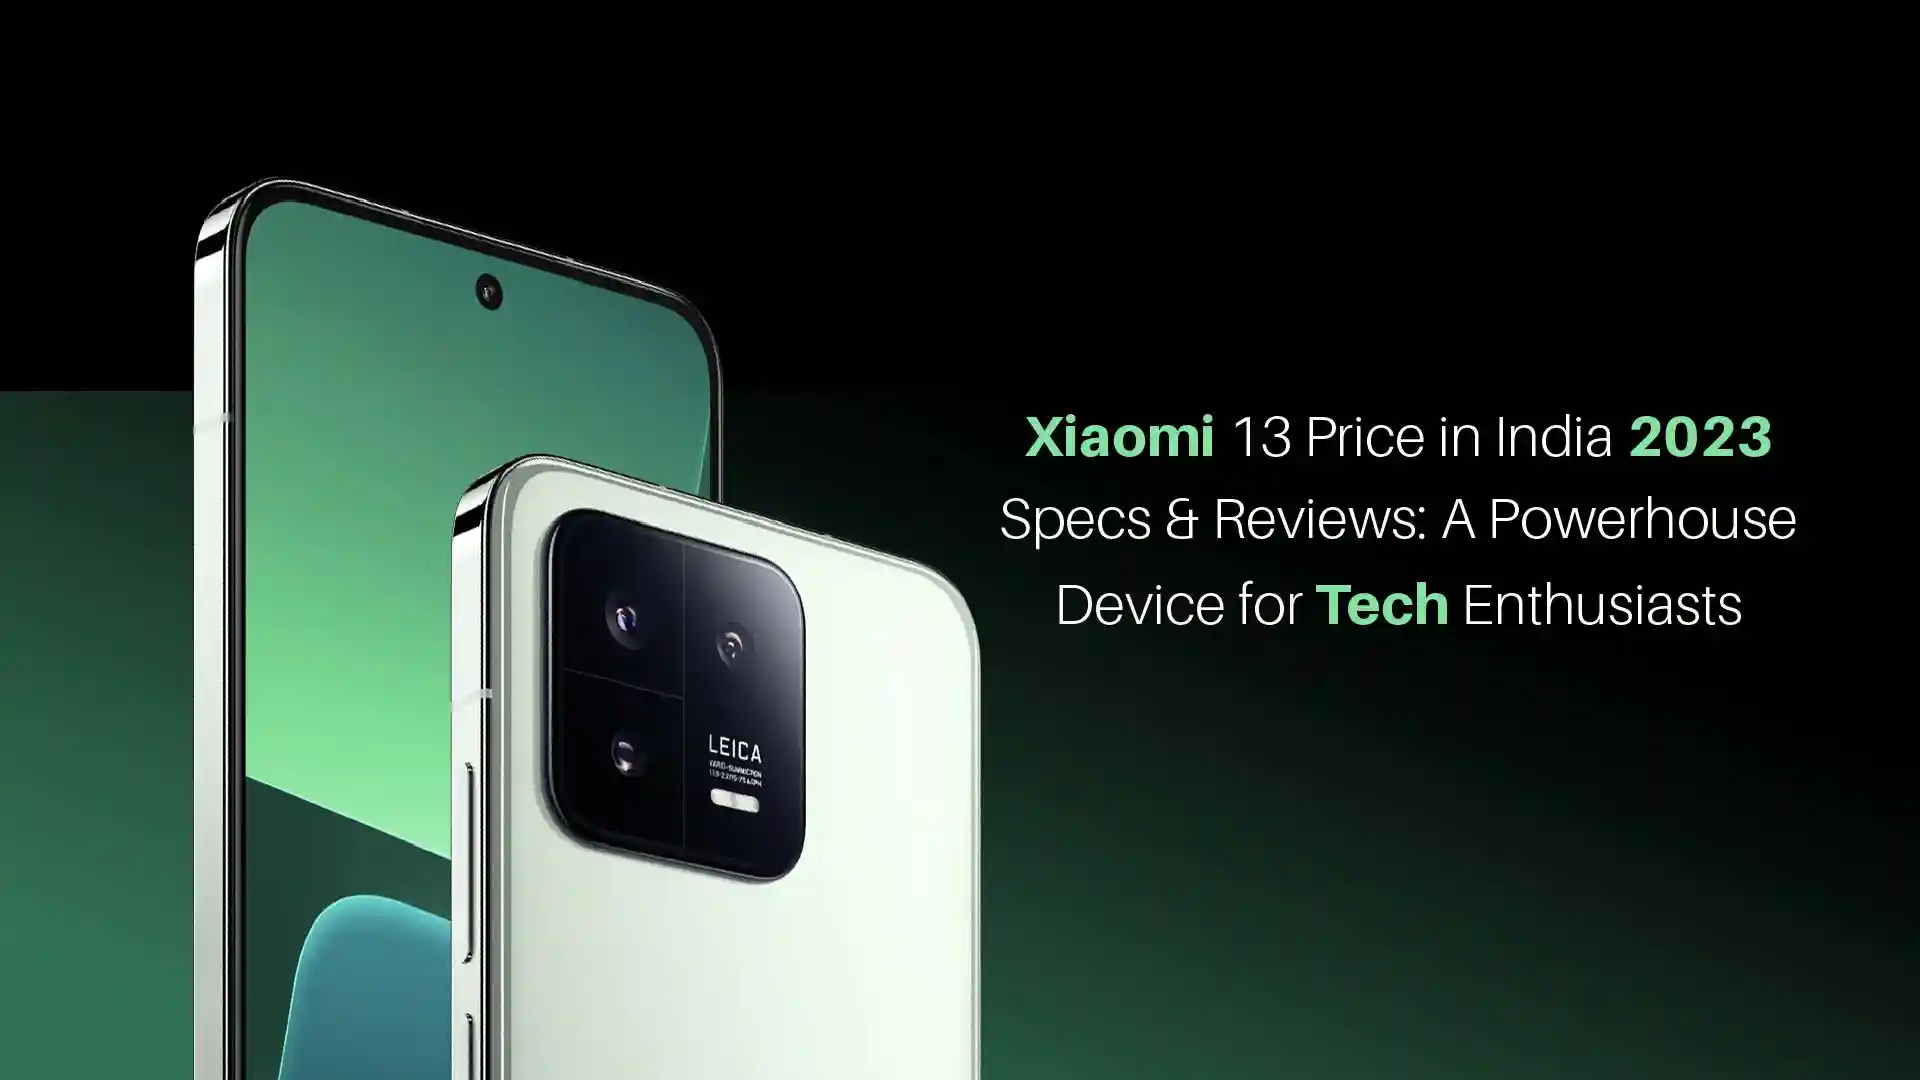 Xiaomi 13 Price in India 2023, Specs & Reviews: A Powerhouse Device for Tech Enthusiasts